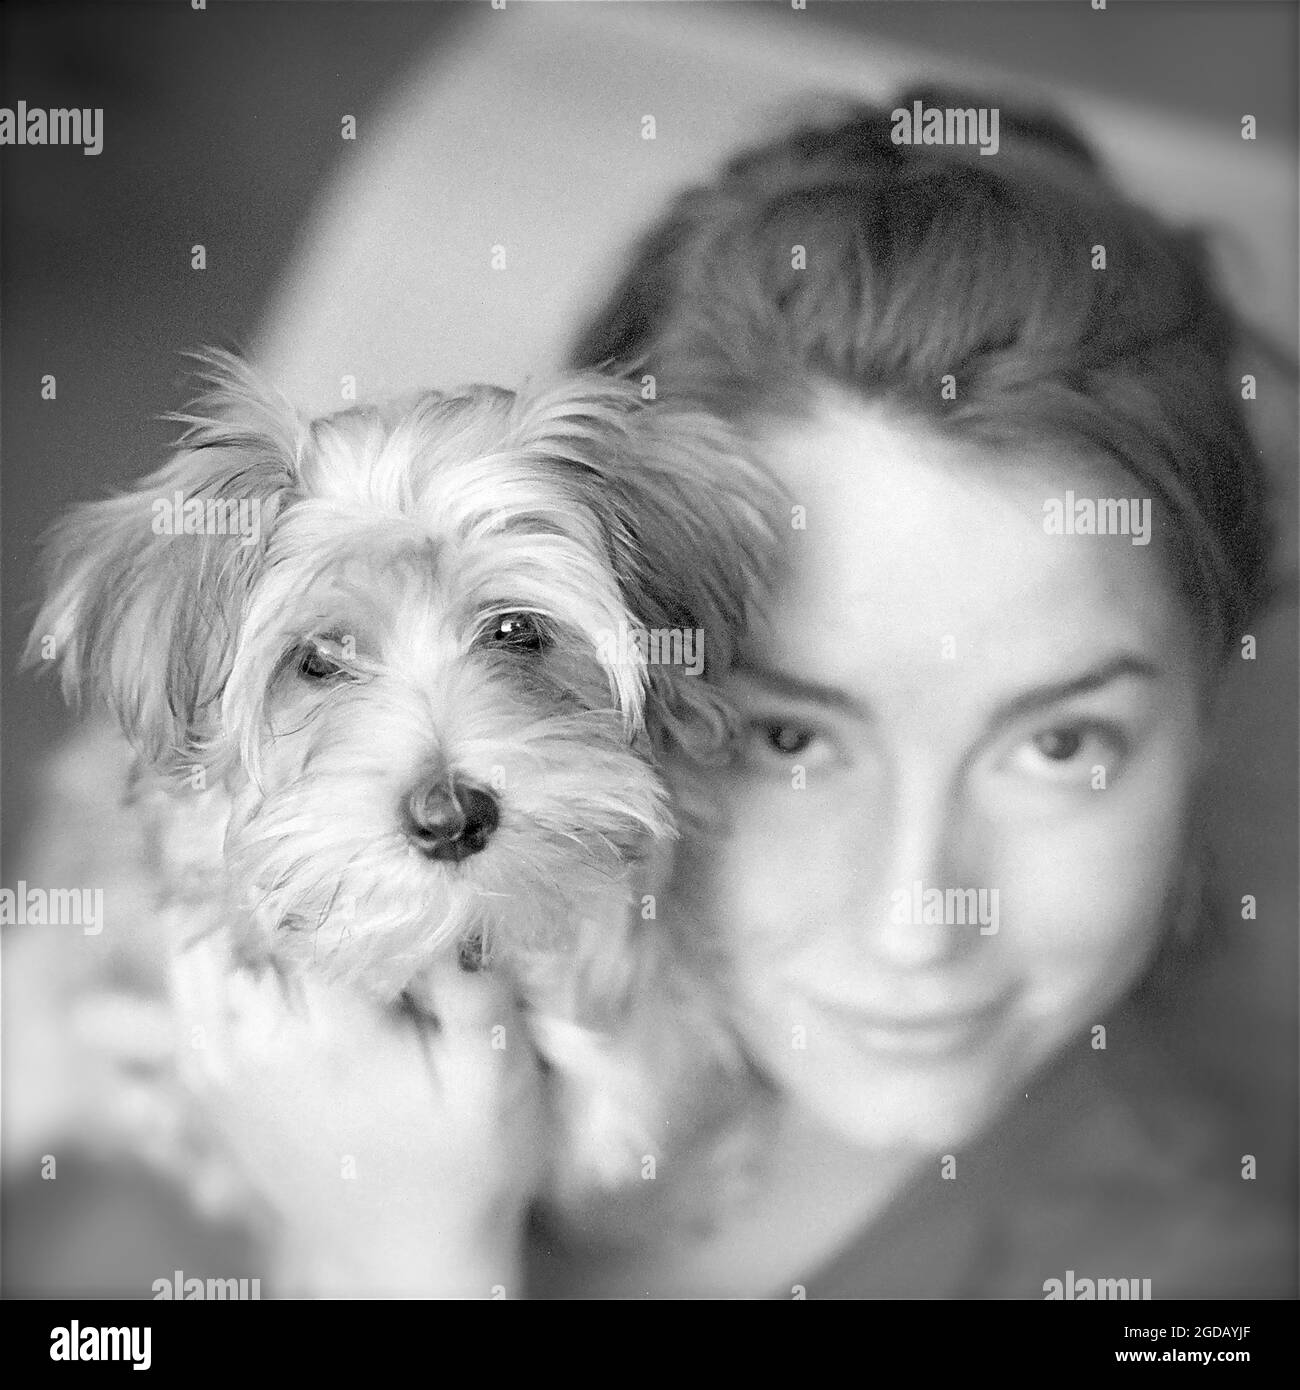 Woman with small dog looking at the camera Stock Photo